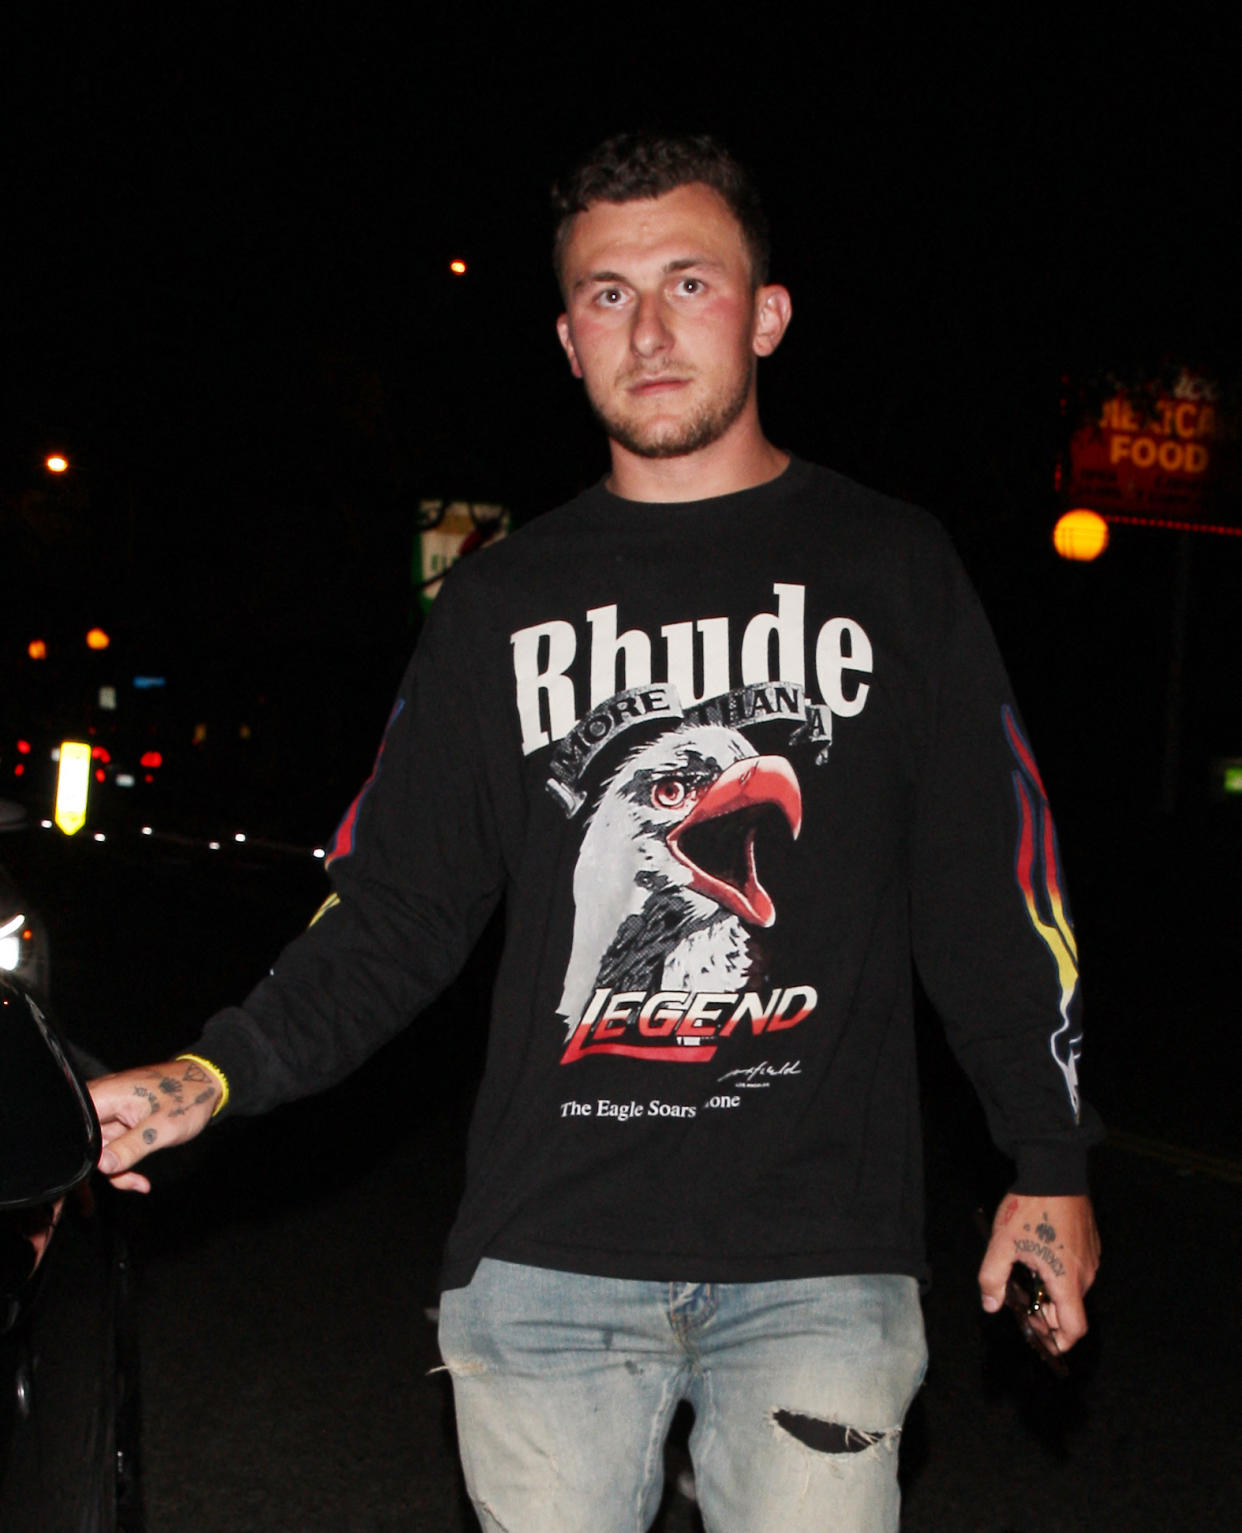 Johnny Manziel Planned to Take His Life After -5 Million Bender